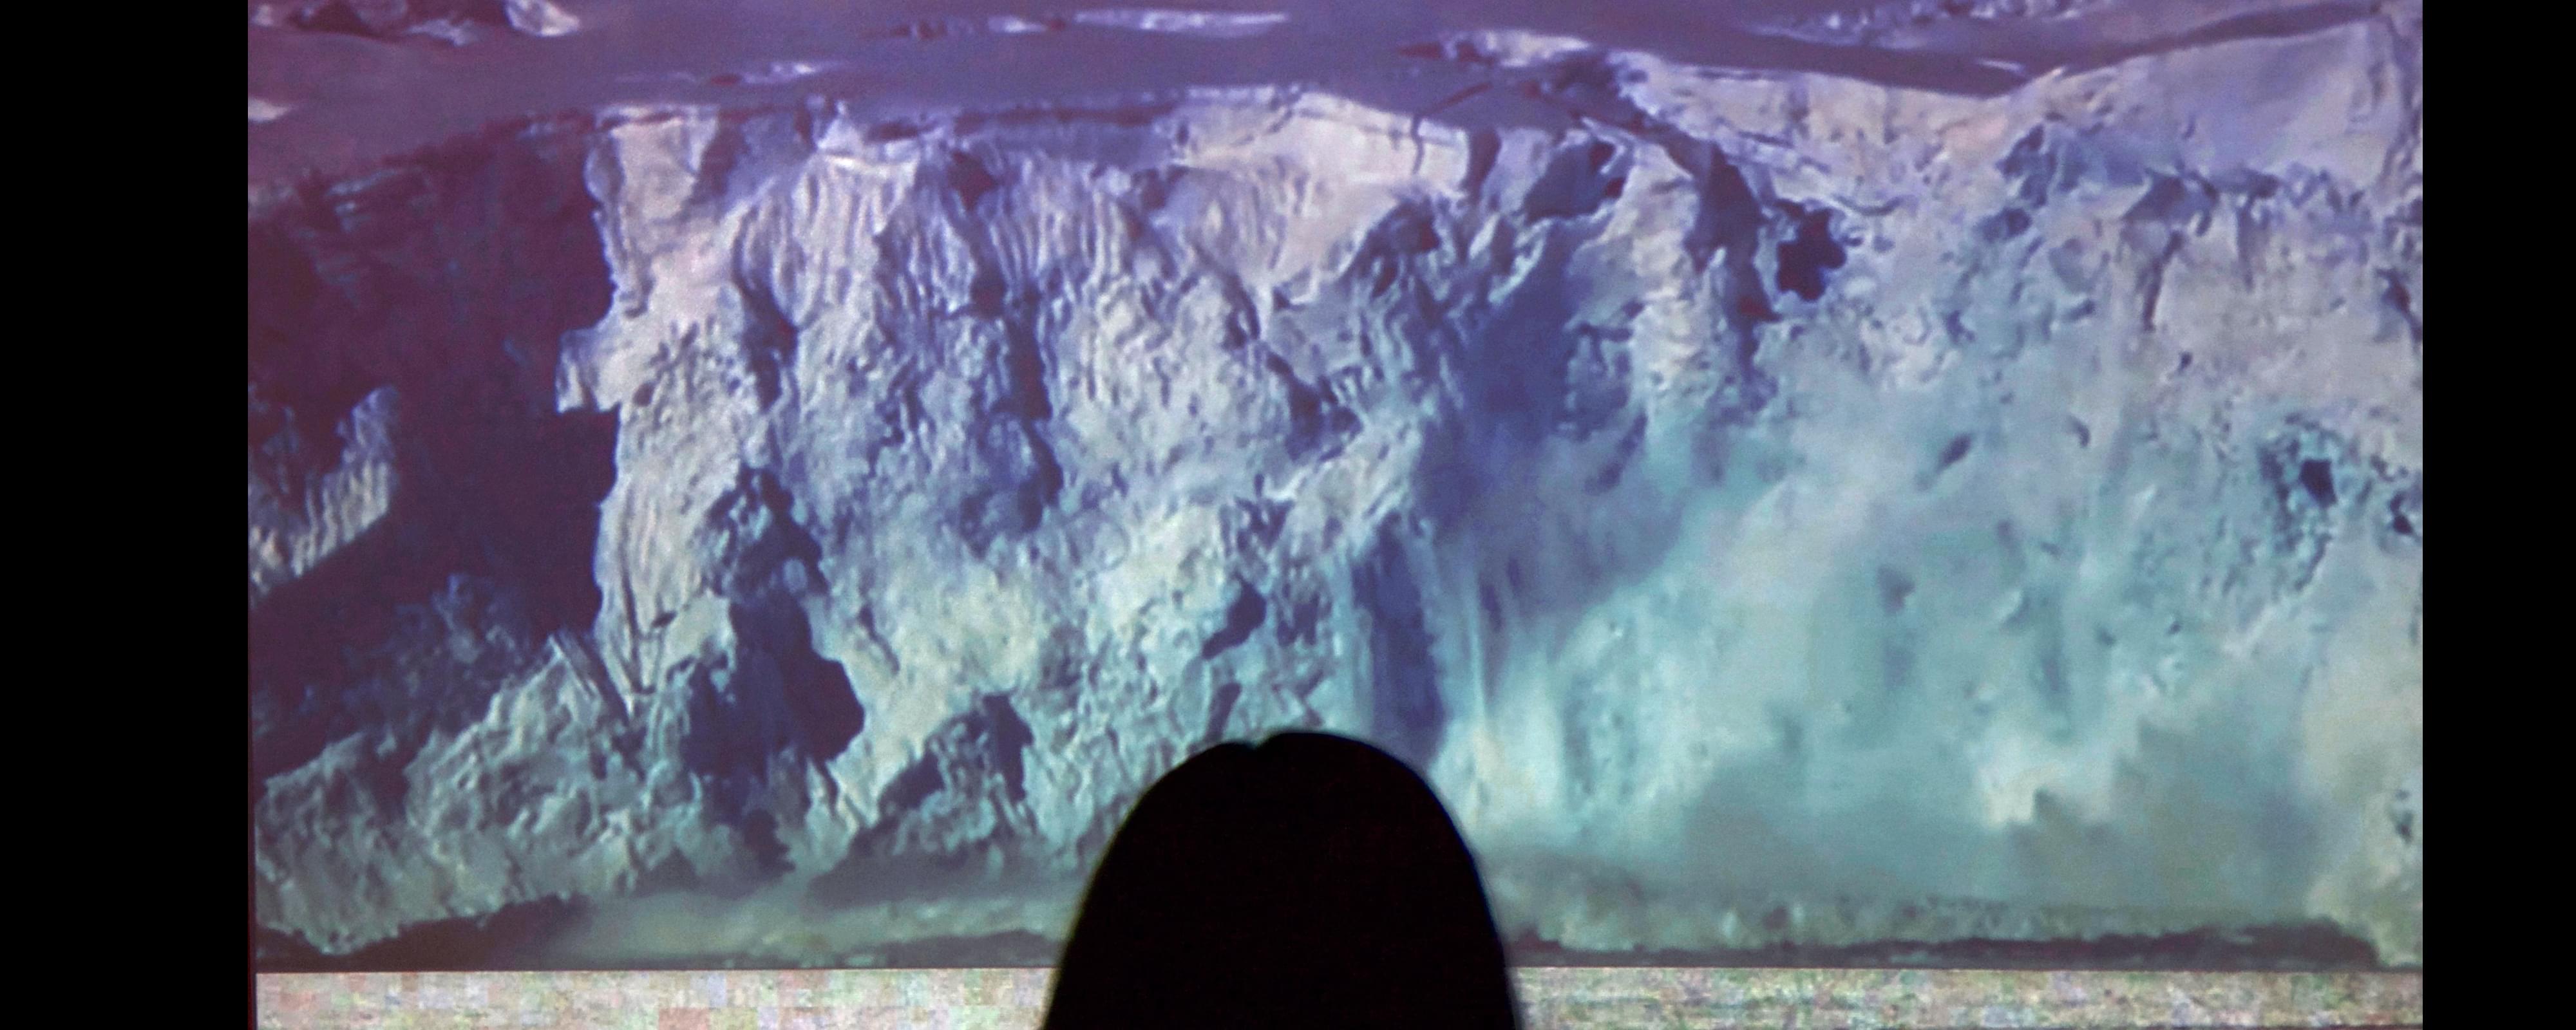 Close-up photograph of the back of a gallery-goer's head as they look at a projected image of a large glacier calving in front of them